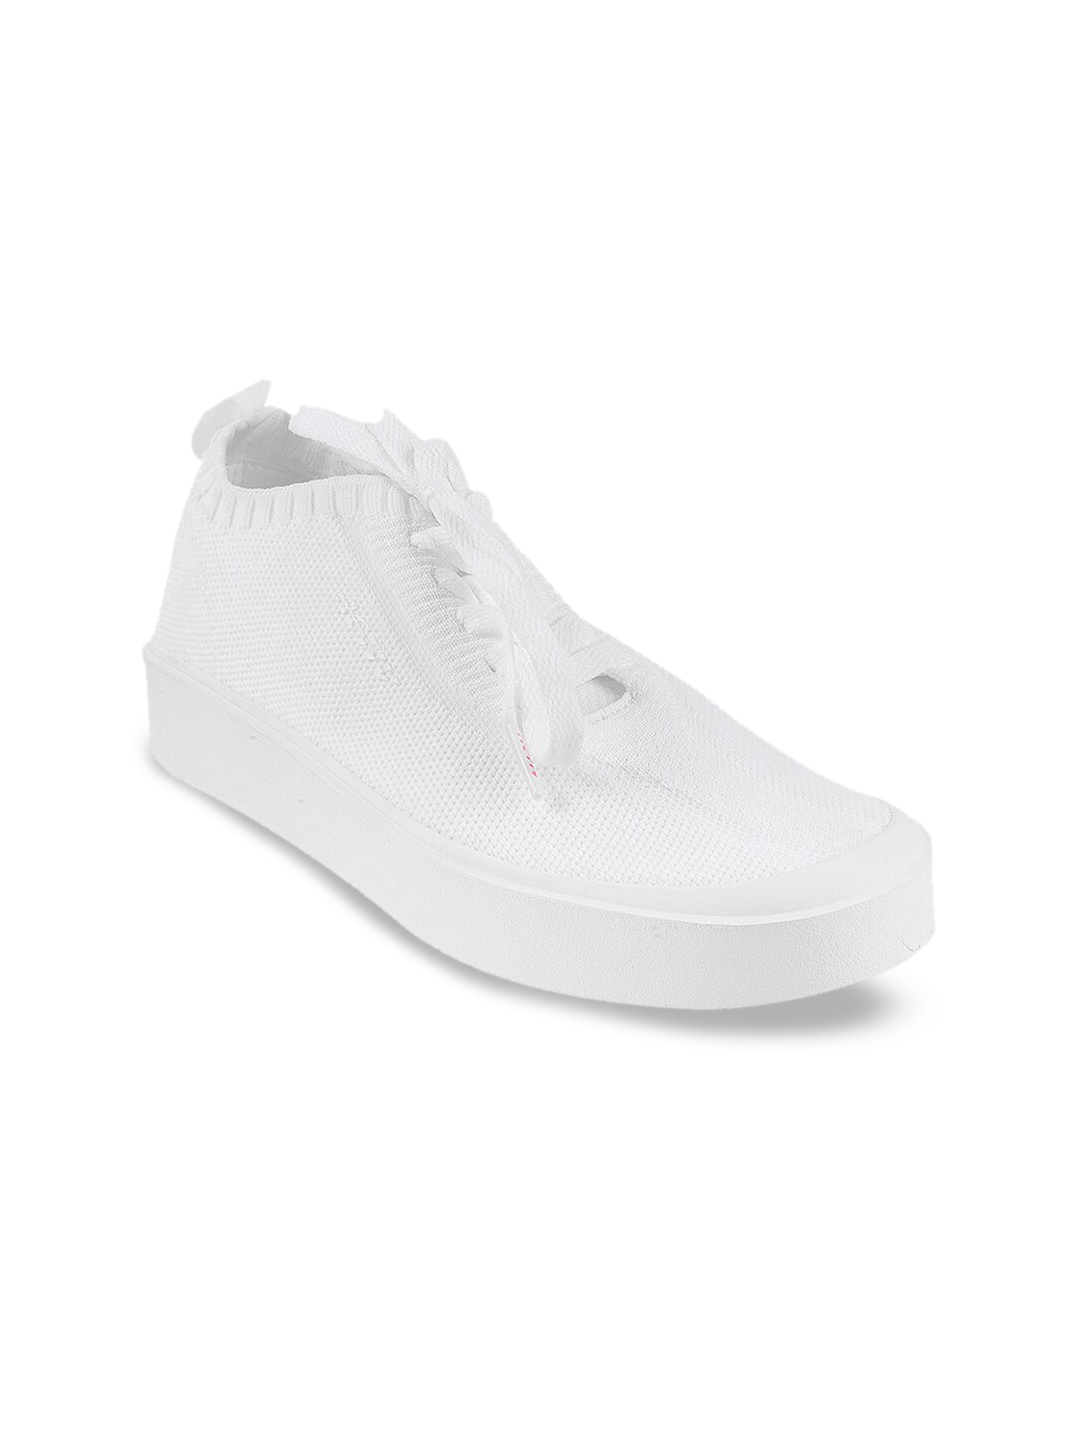 ACTIV Women White Sneakers Price in India